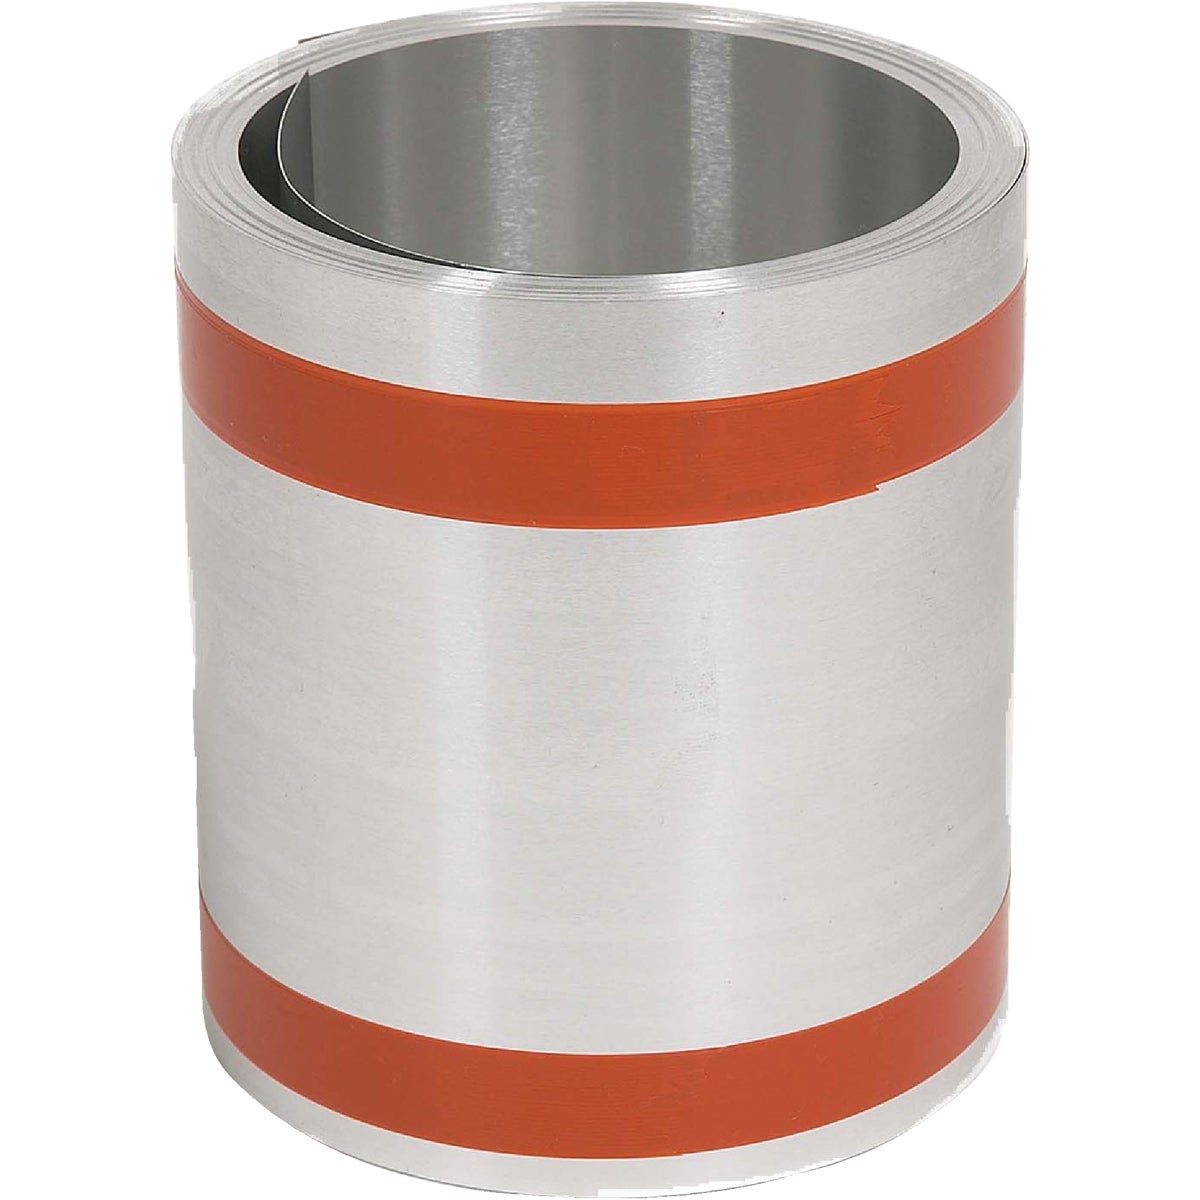 Item 100247, Aluminum roll valley protects against water infiltration and has a variety 